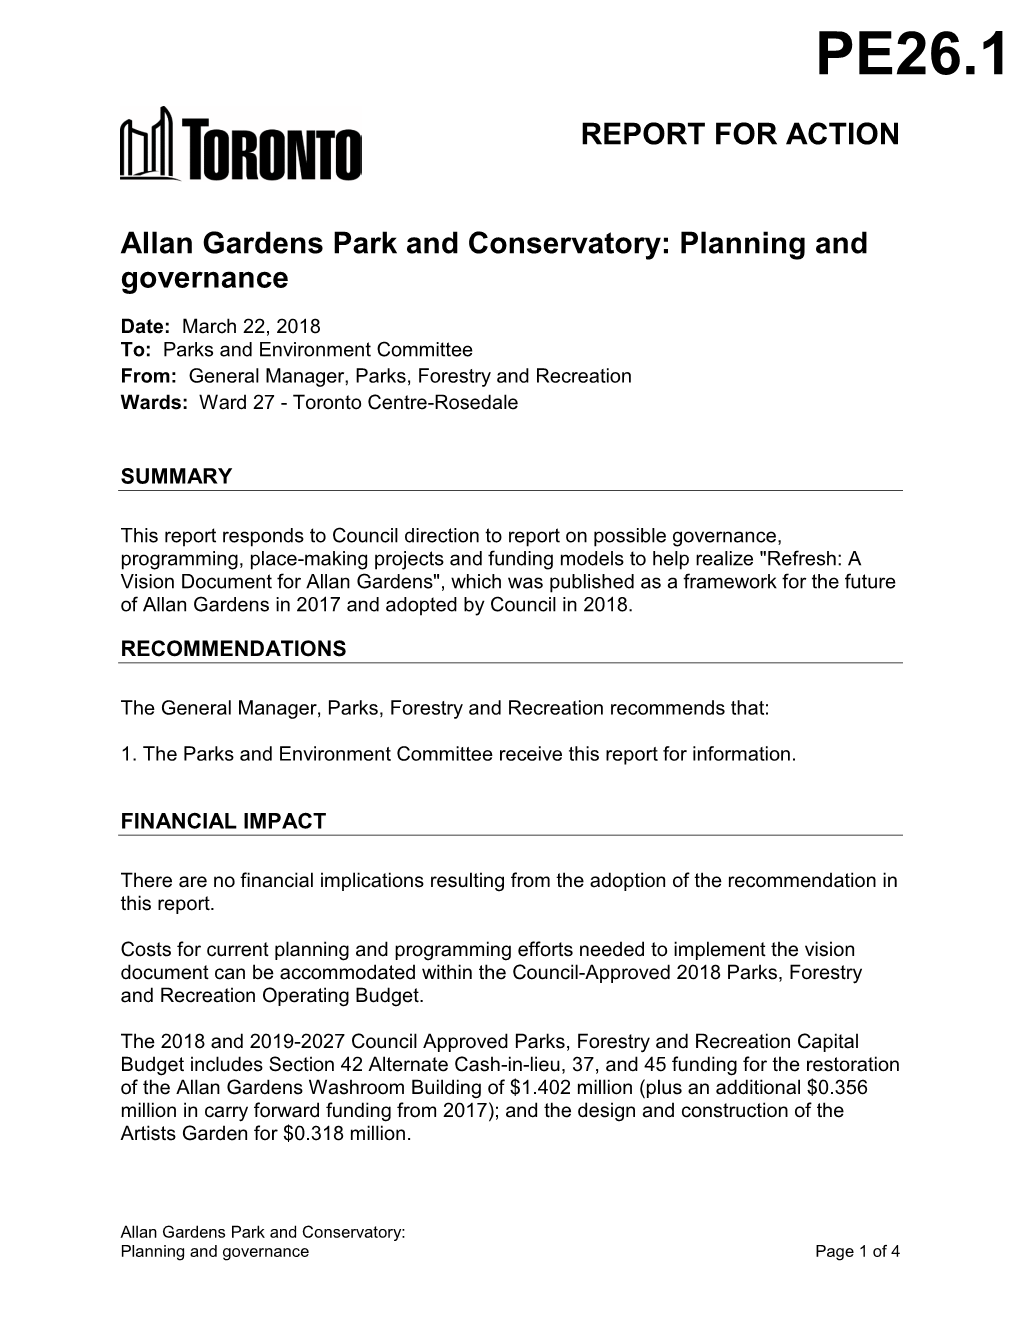 Allan Gardens Park and Conservatory: Planning and Governance